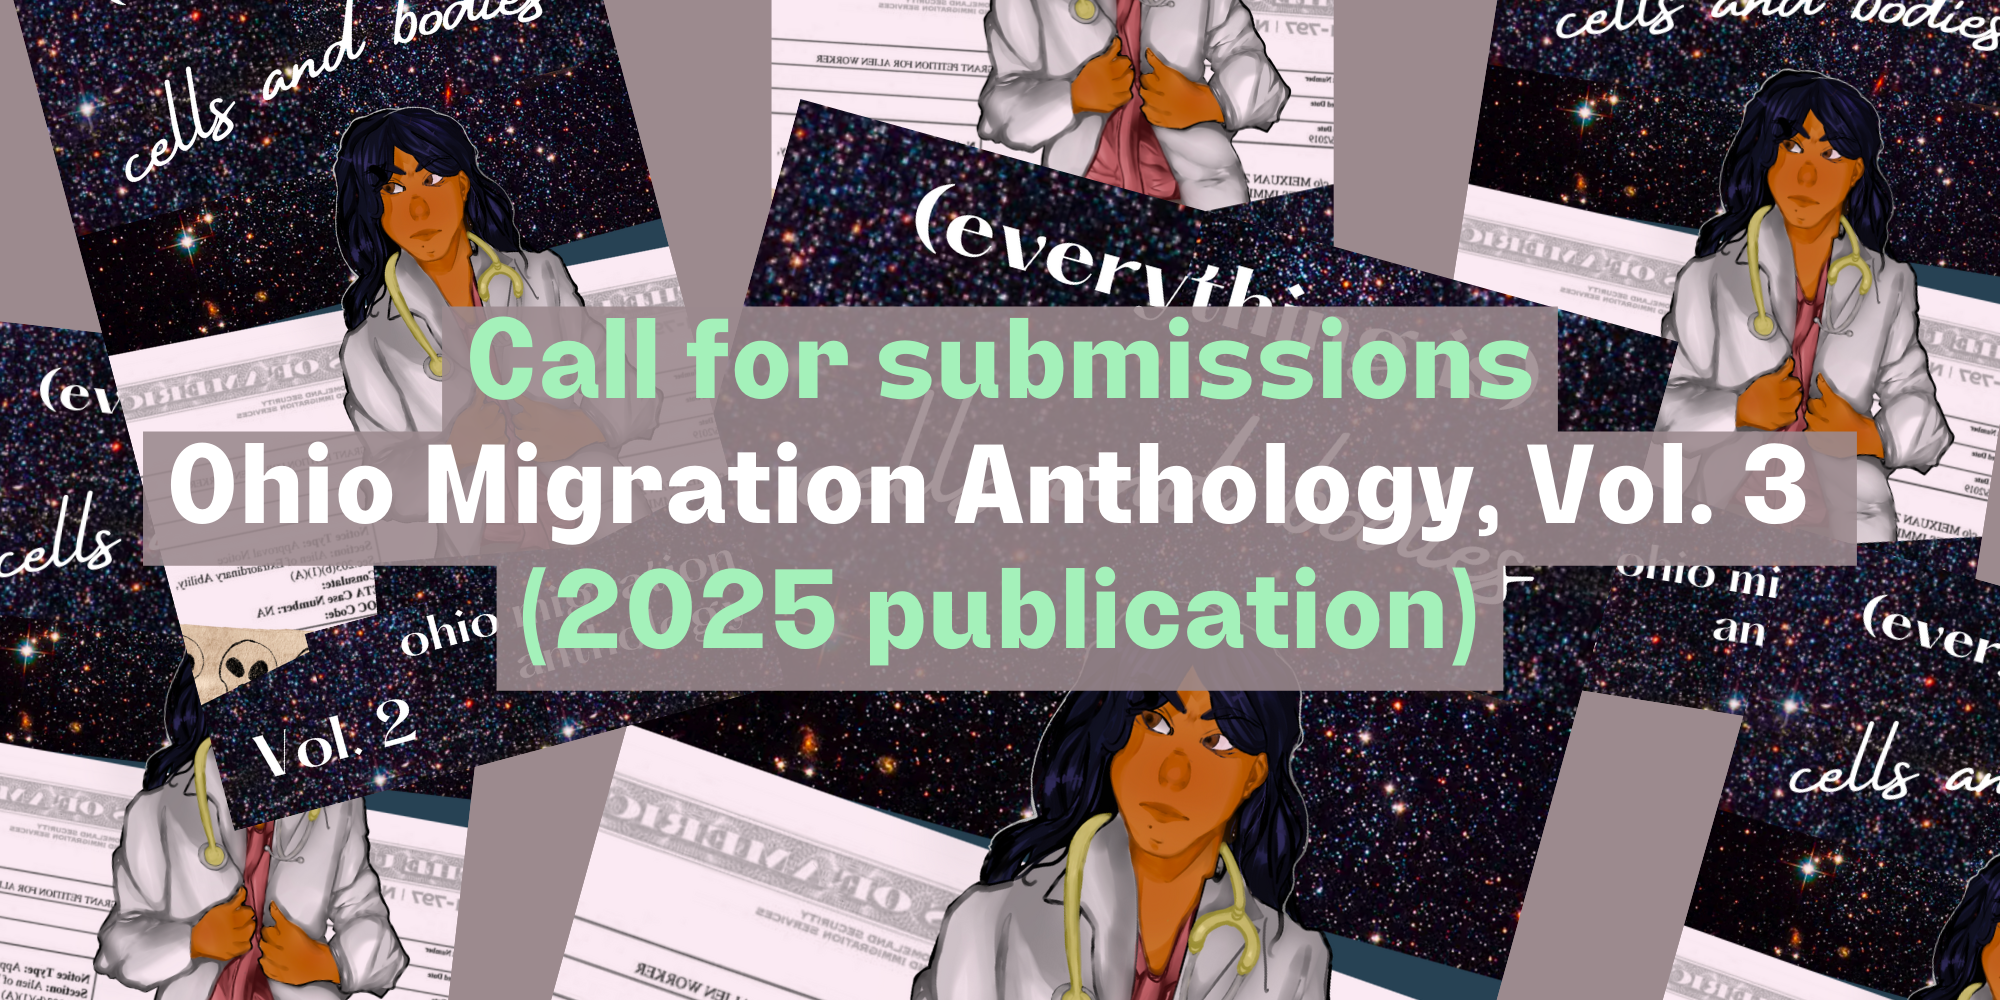 Cover image from Ohio Migration Anthology Volume 2, with a call for submissions for Volume 3.